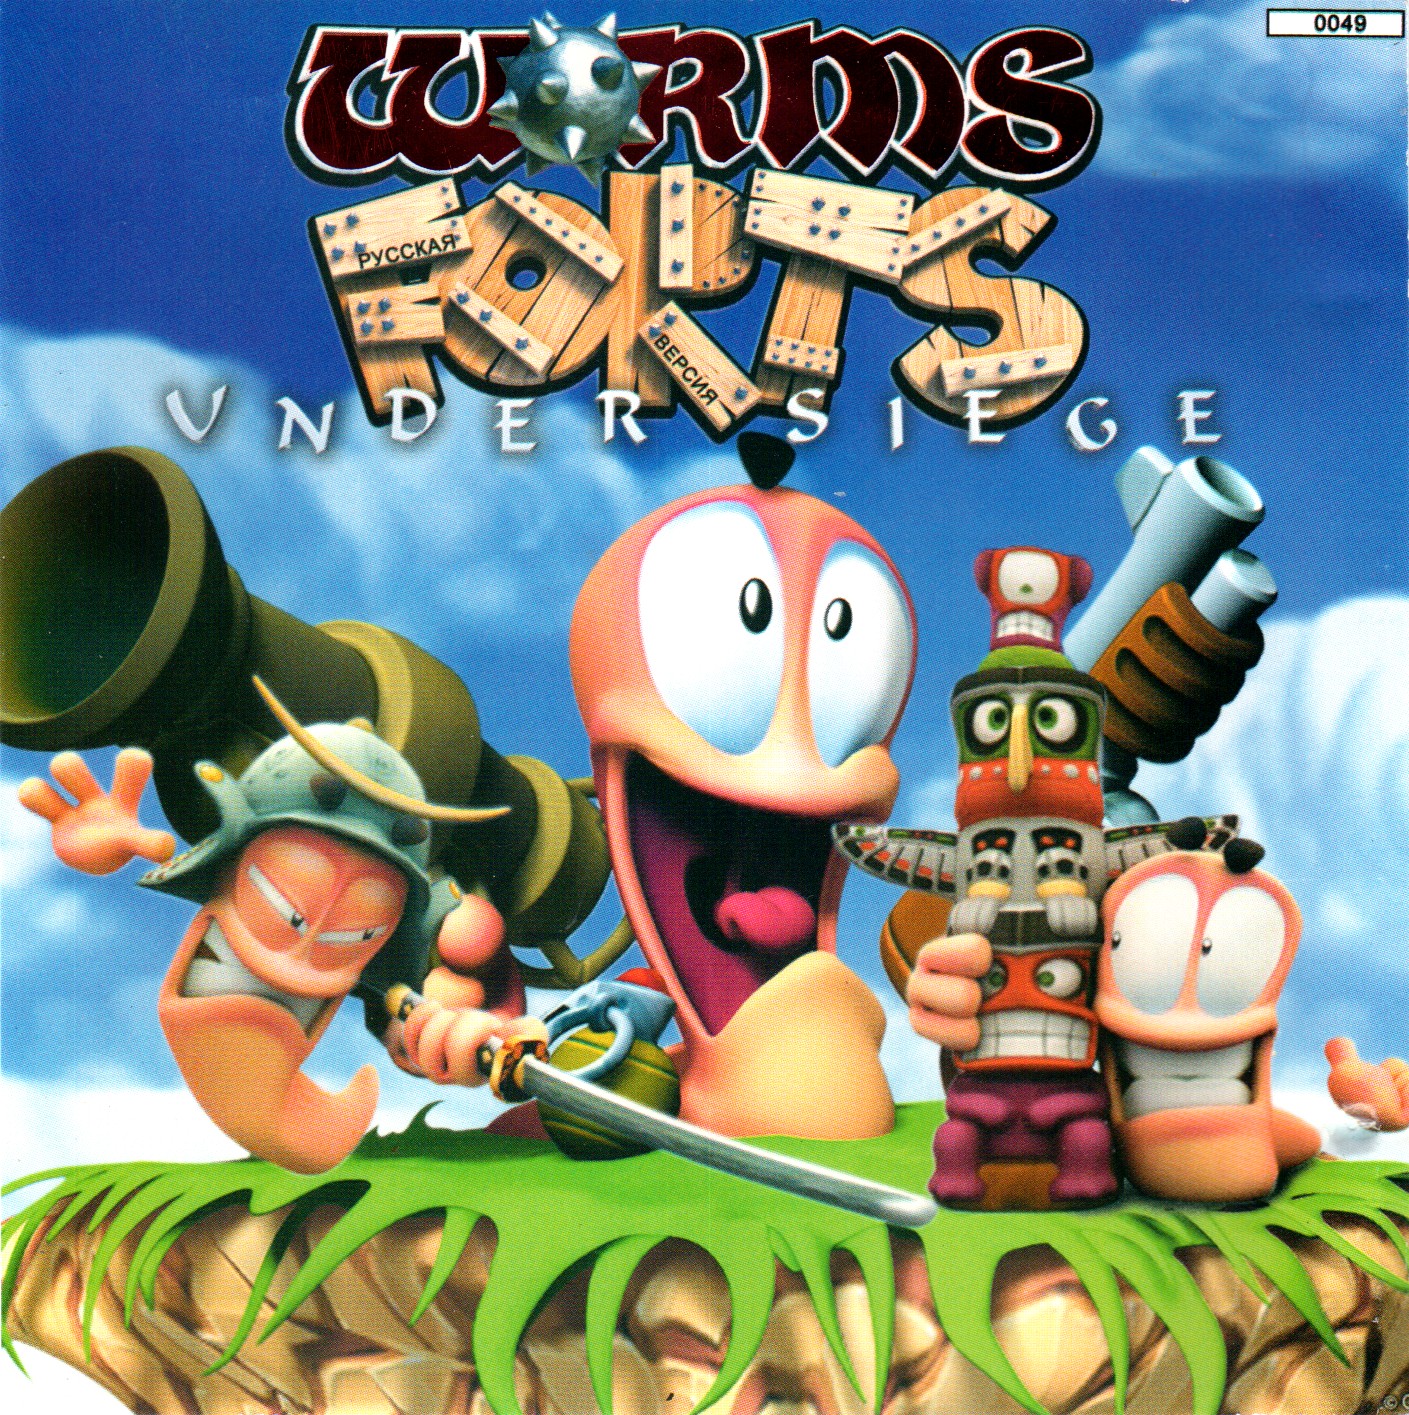 Worms forts. Worms Forts: в осаде. Worms Forts under Siege. Worms 4 Mayhem. Worms 2 in 1 Dreamcast RGR обложка.